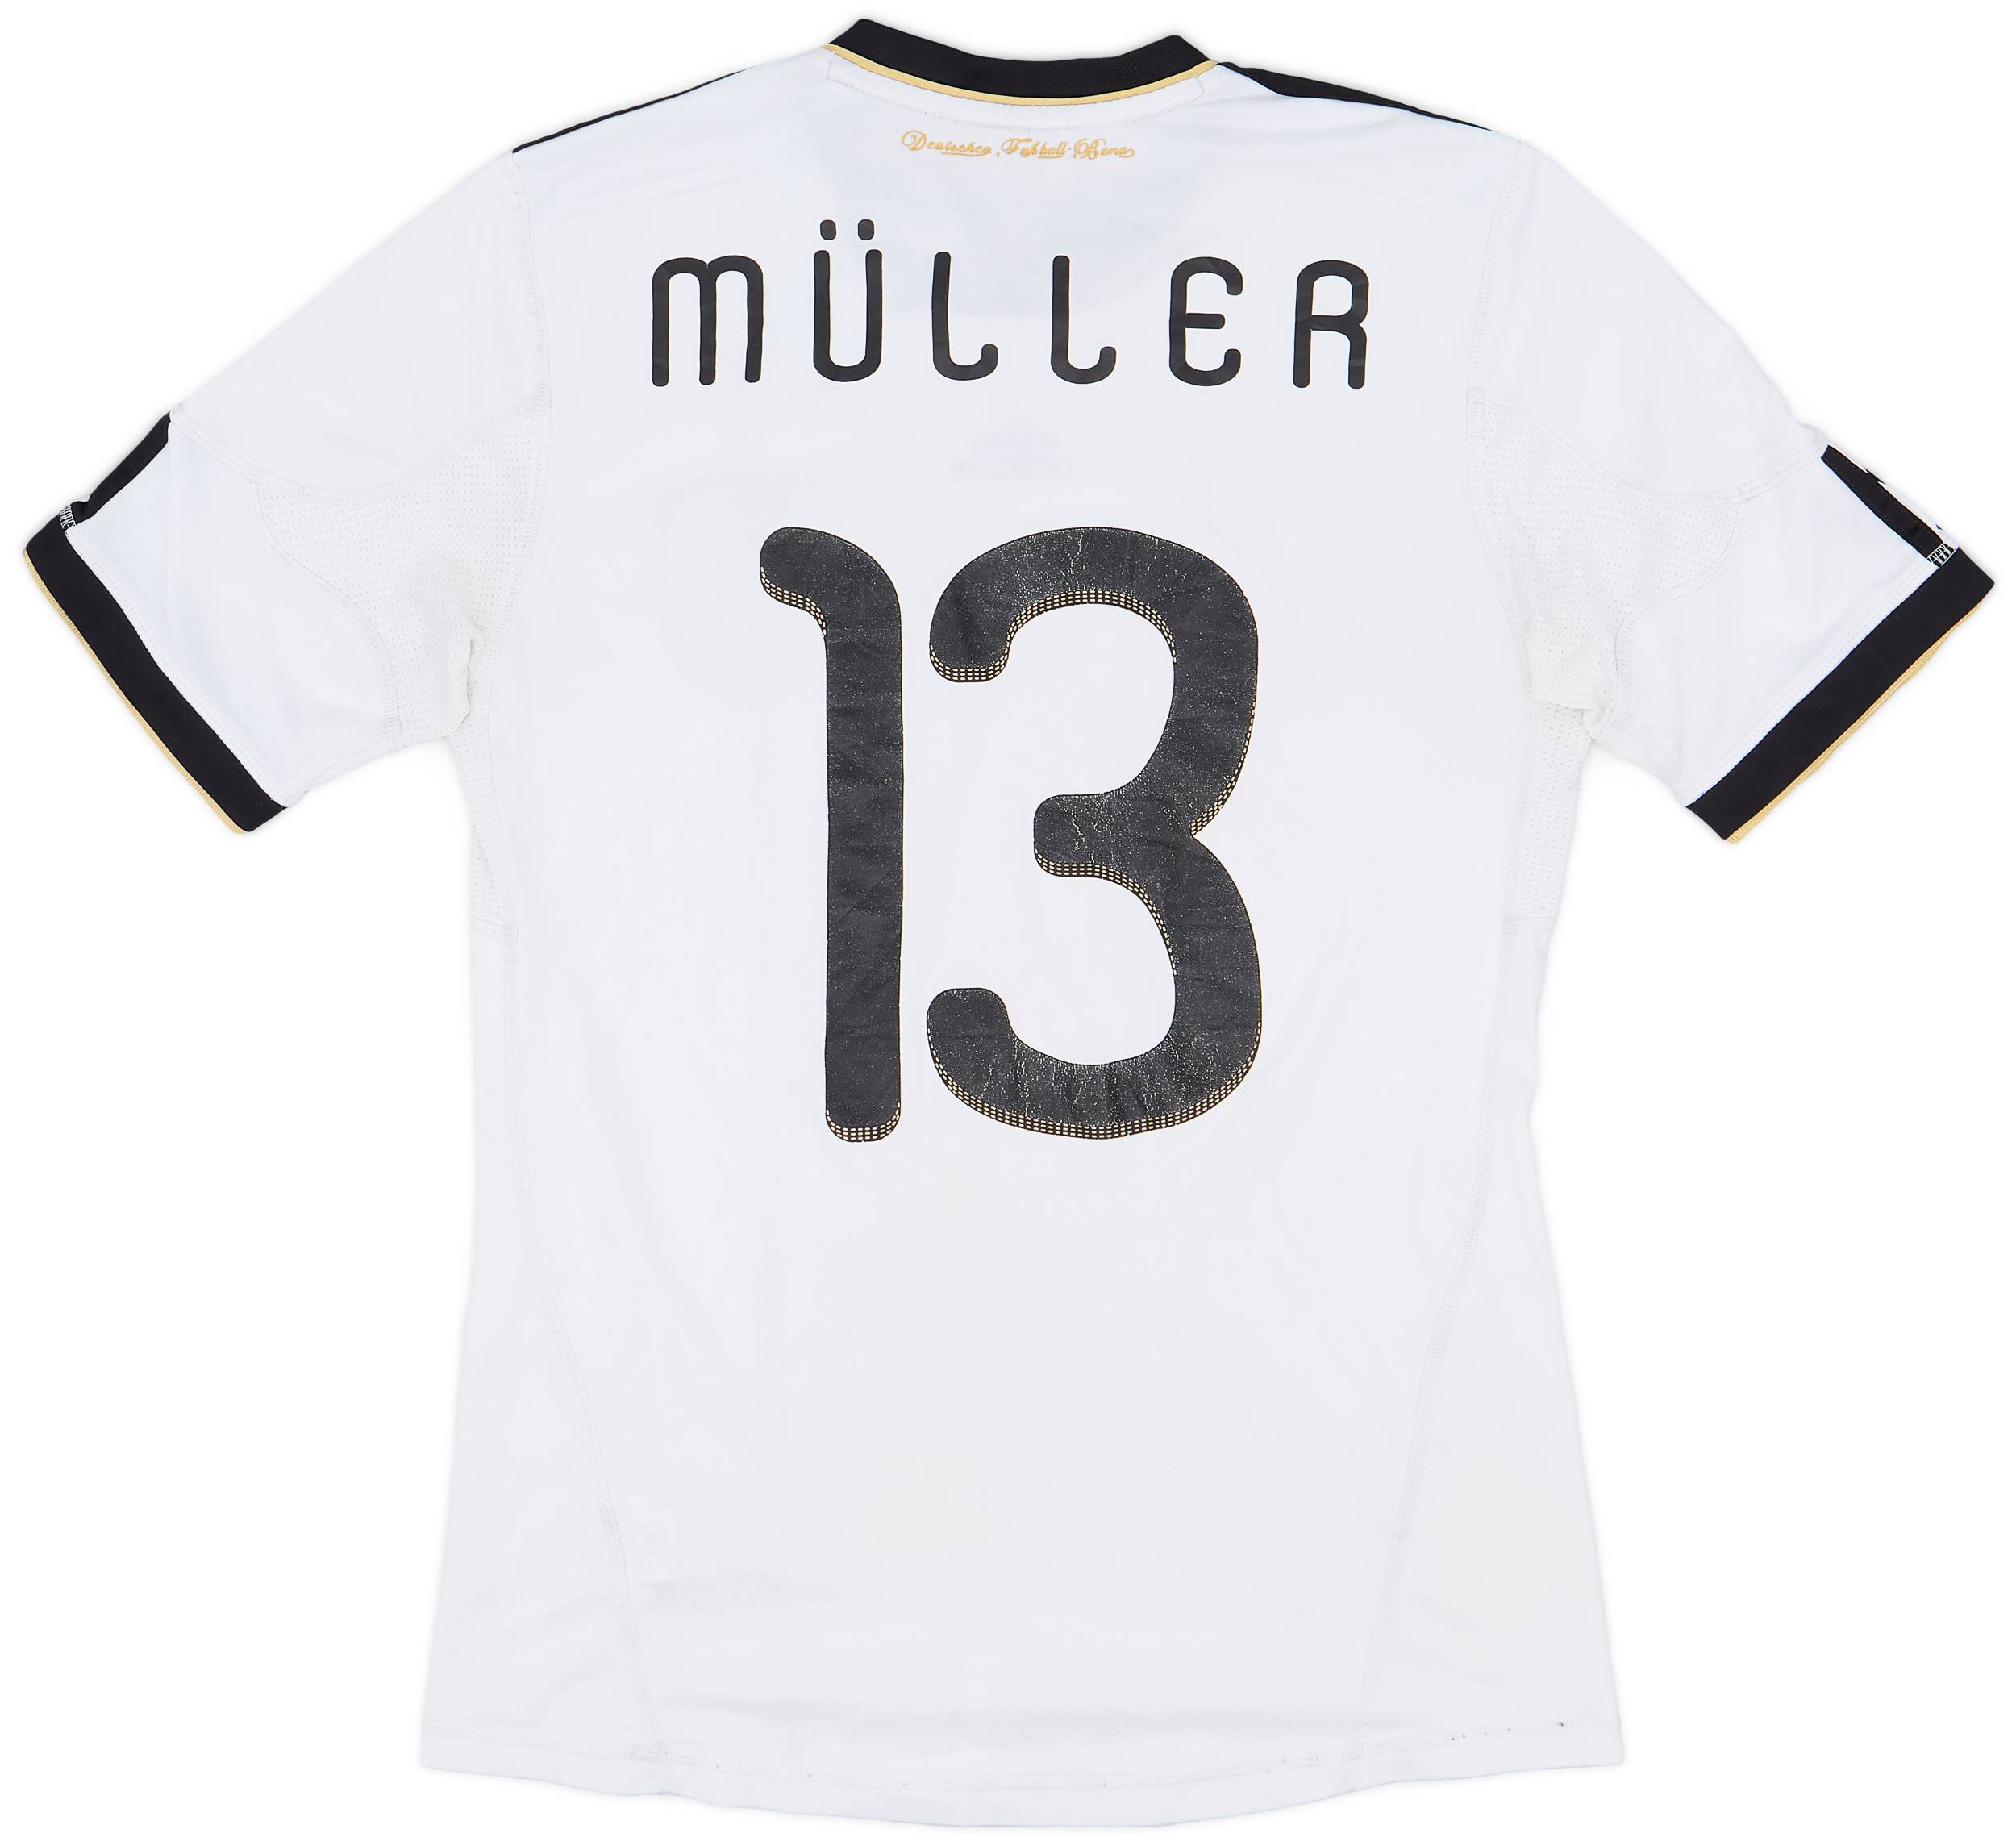 2010-11 Germany Home Shirt Muller #13 - 6/10 - (S)